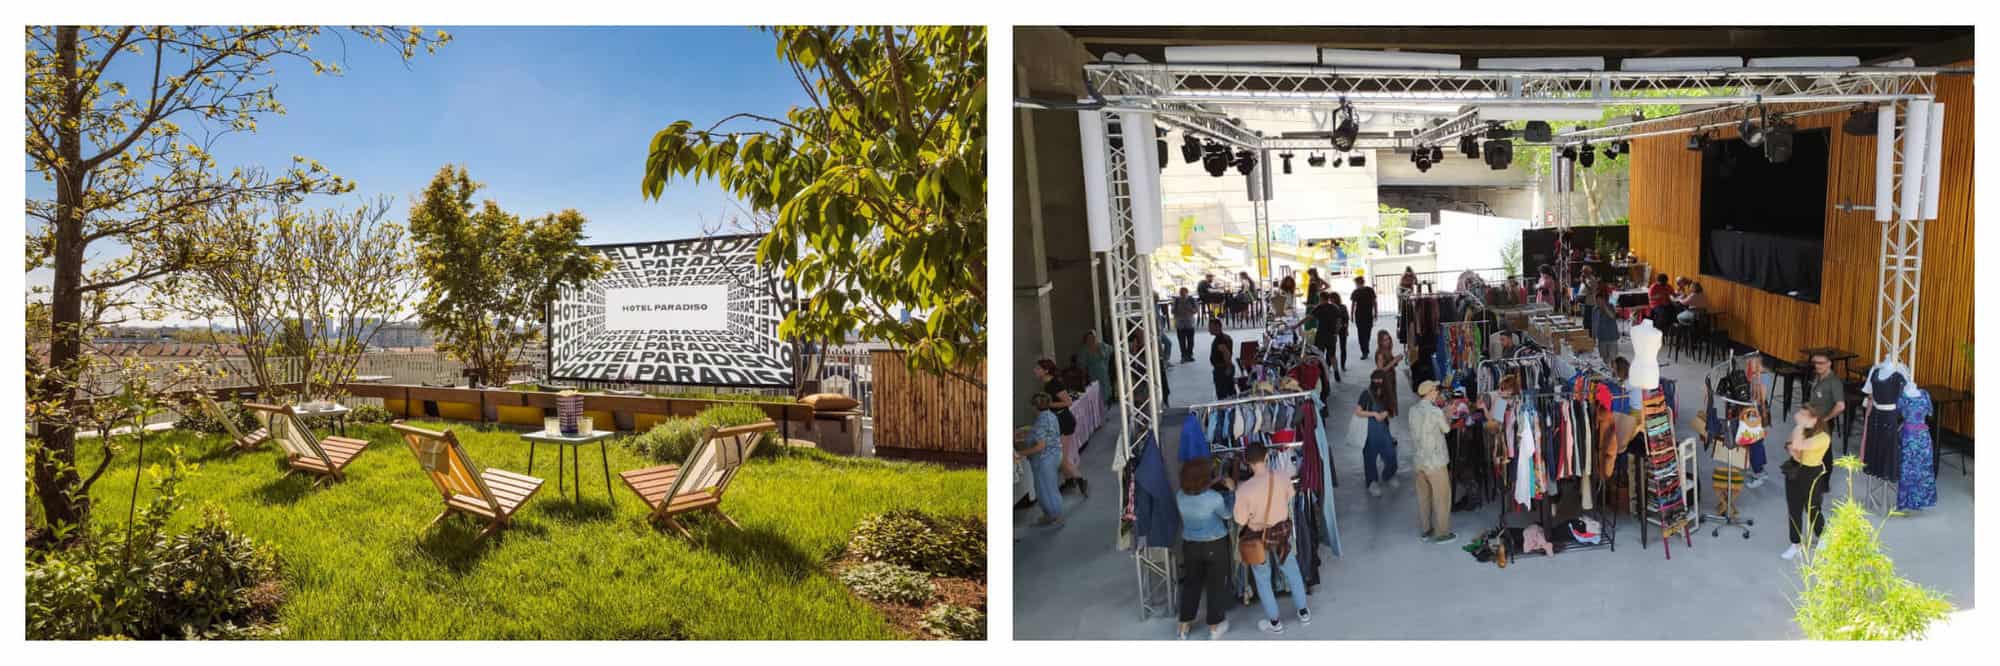 Left: a Parisian rooftop covered in grass and trees with a big screen TV in front of 3 wooden lounge chairs. Right: A shipping container at Kilometre25 in Paris filled with merchants selling clothes and other goods, along with tables on the perimeter with people drinking and eating.